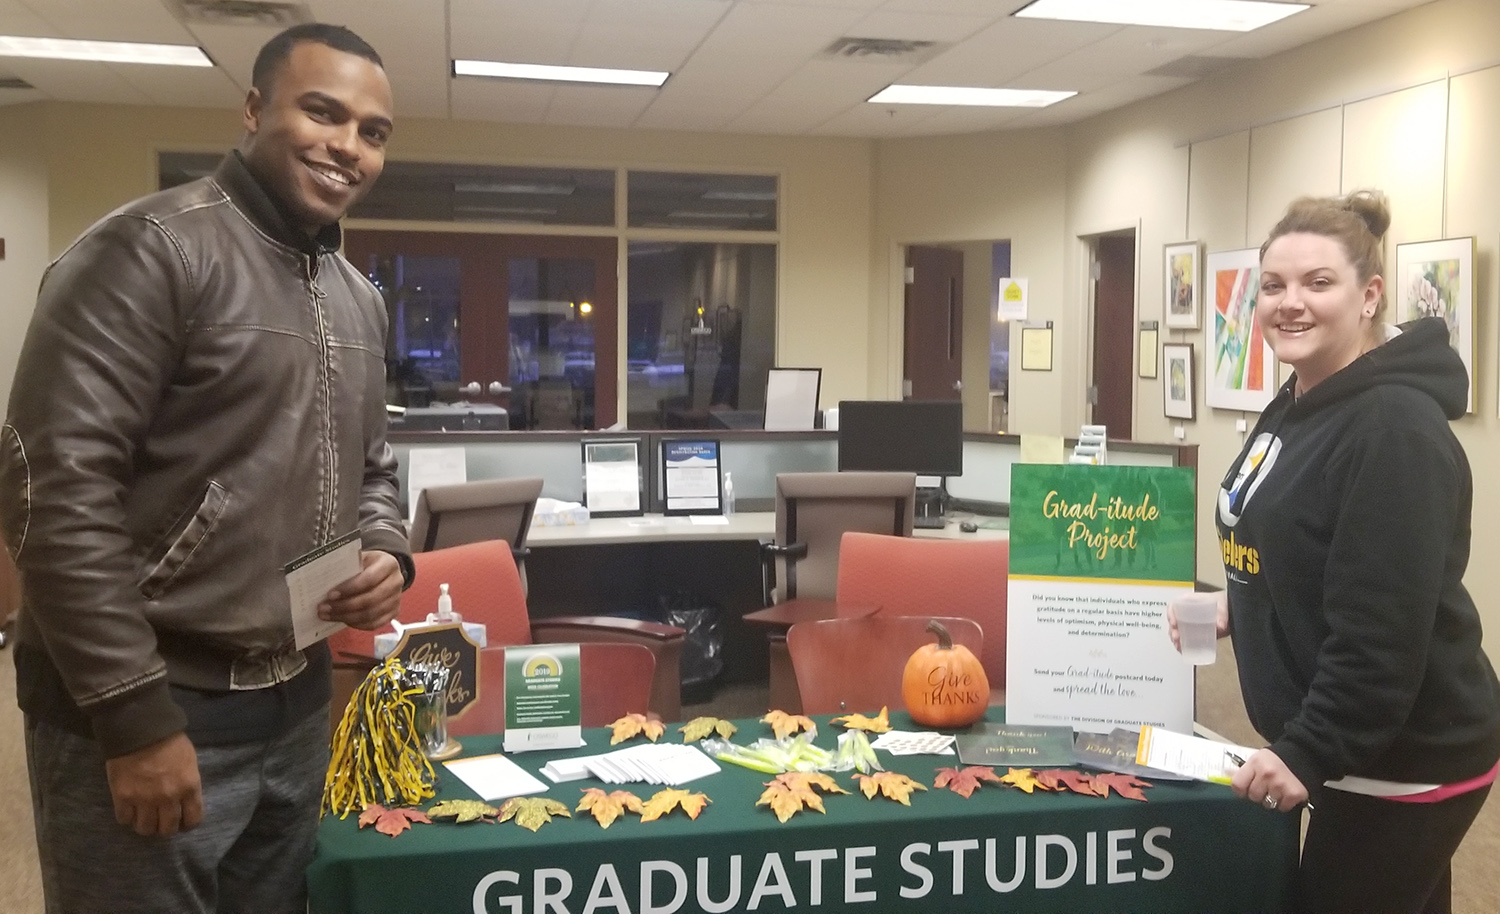 During Graduate Studies Week, criminal justice majors Sam Roberts and Emily Jock attend an event at SUNY Oswego’s Syracuse campus